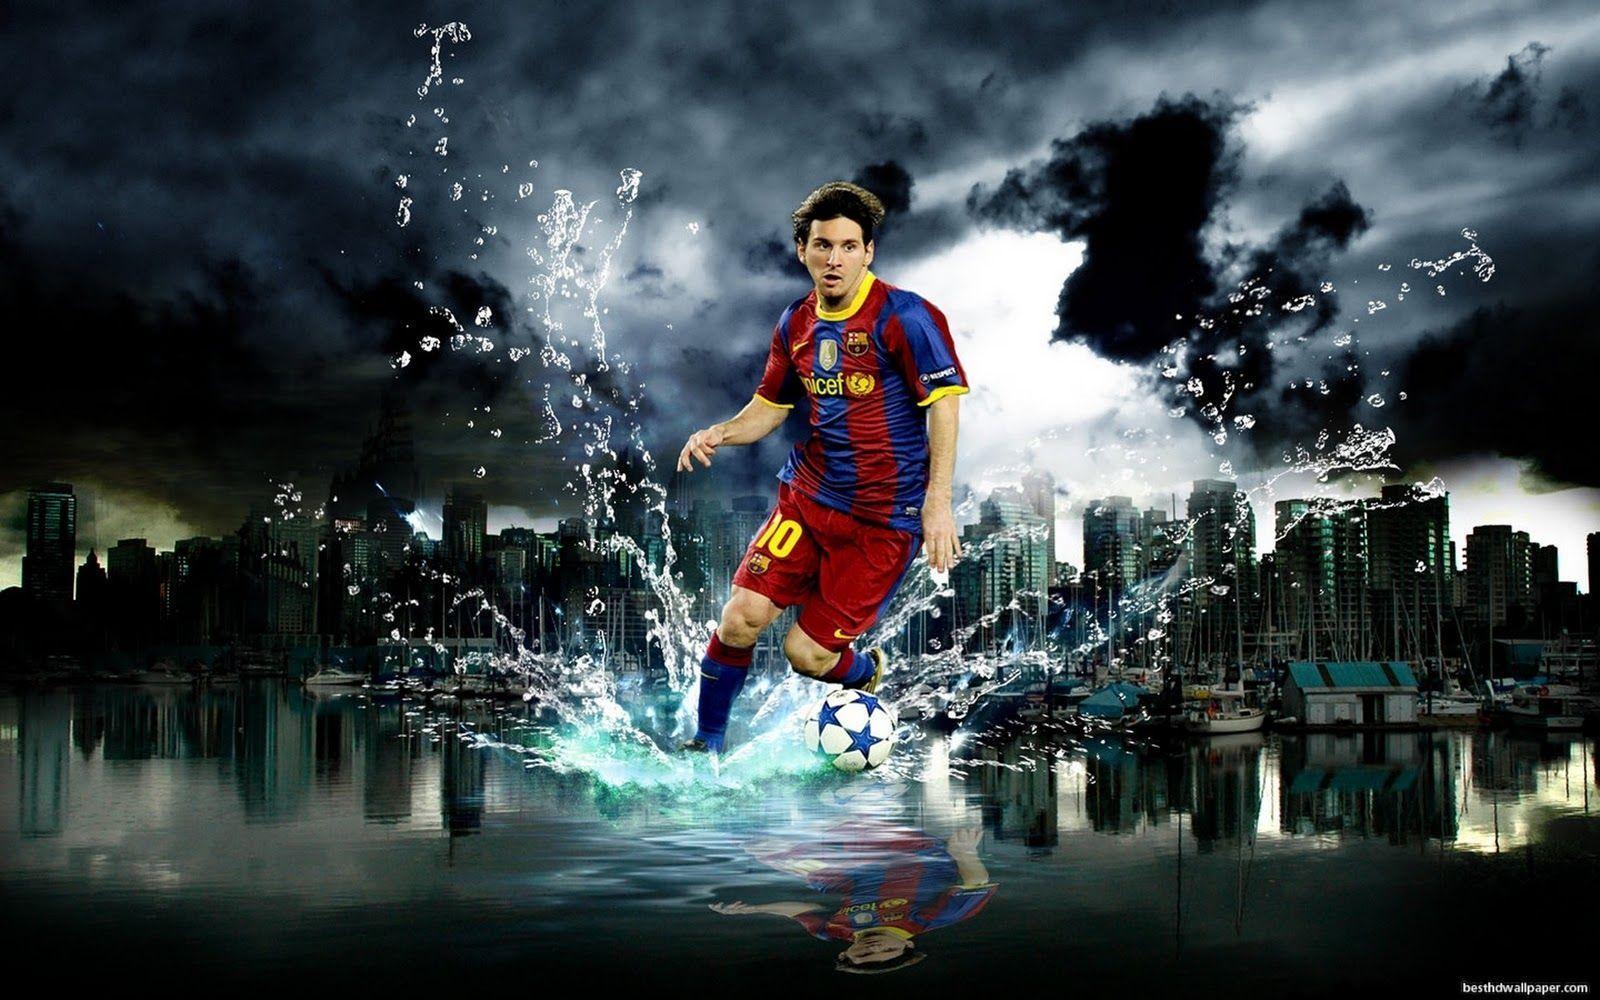 Messi Cool Backgrounds - Lionel Messi Wallpapers HD : Free & easy!app builder no coding!